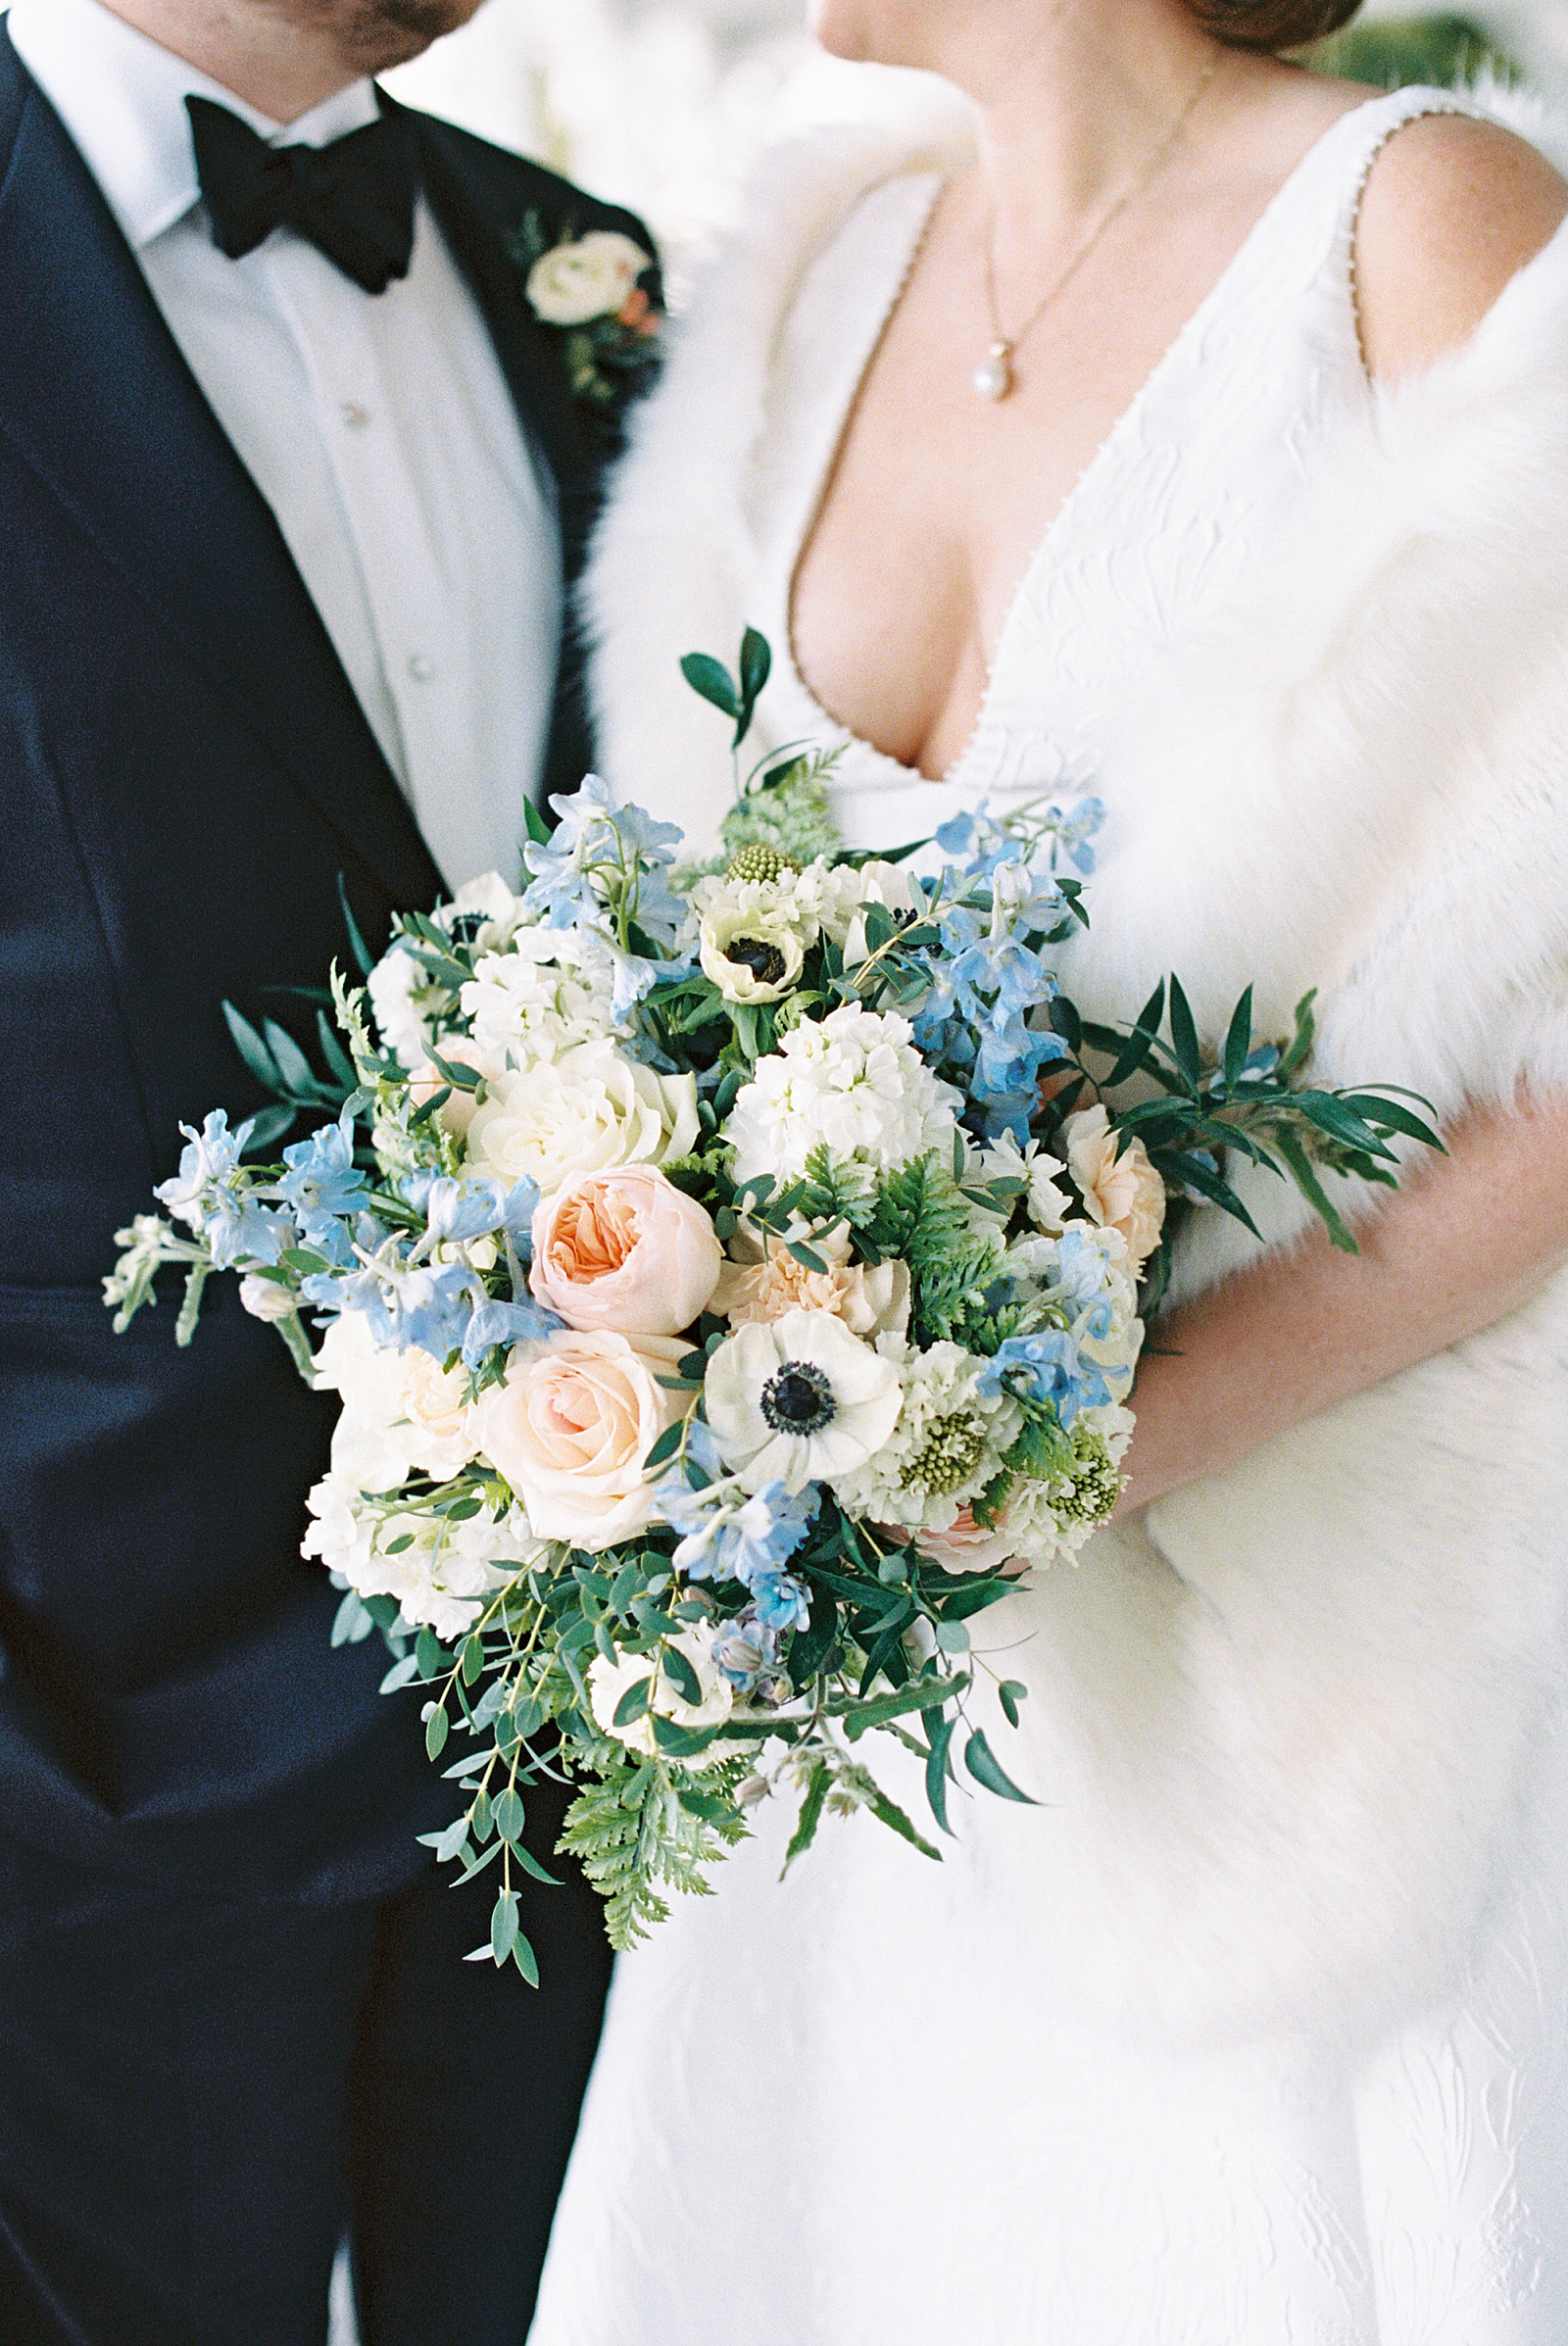 Bridal flowers with cream, peach and blue accents by New York Photographer Lynne Reznick 